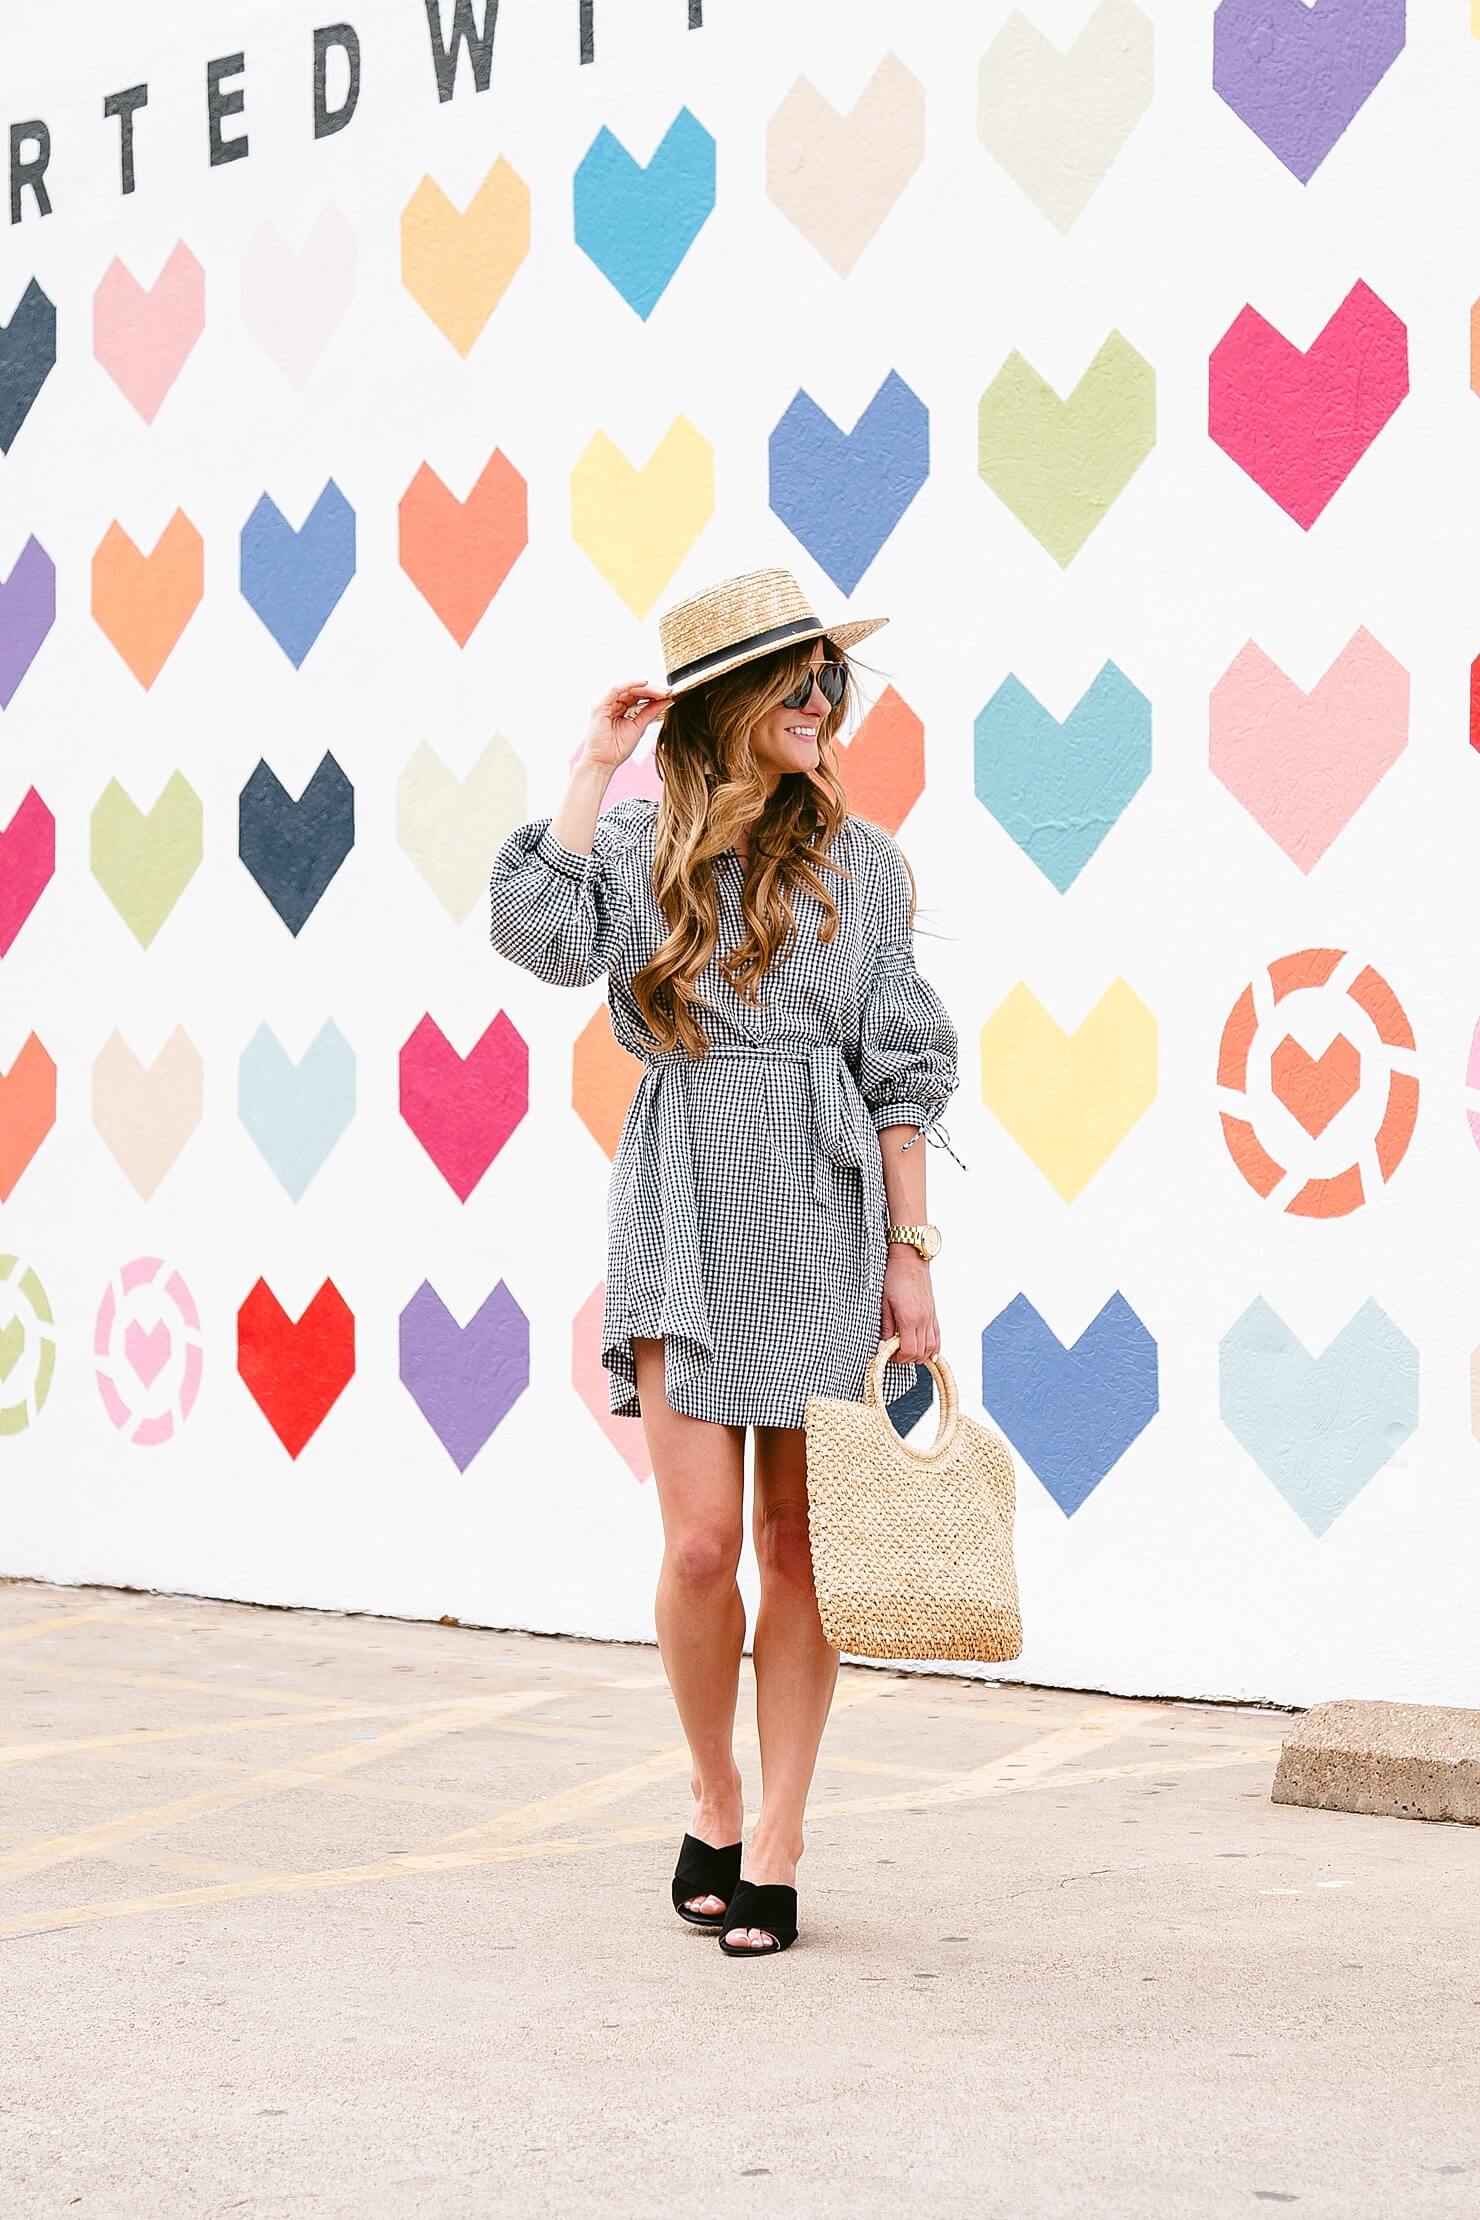 brighton keller wearing gingham dress with mules and straw boater hat and bag 